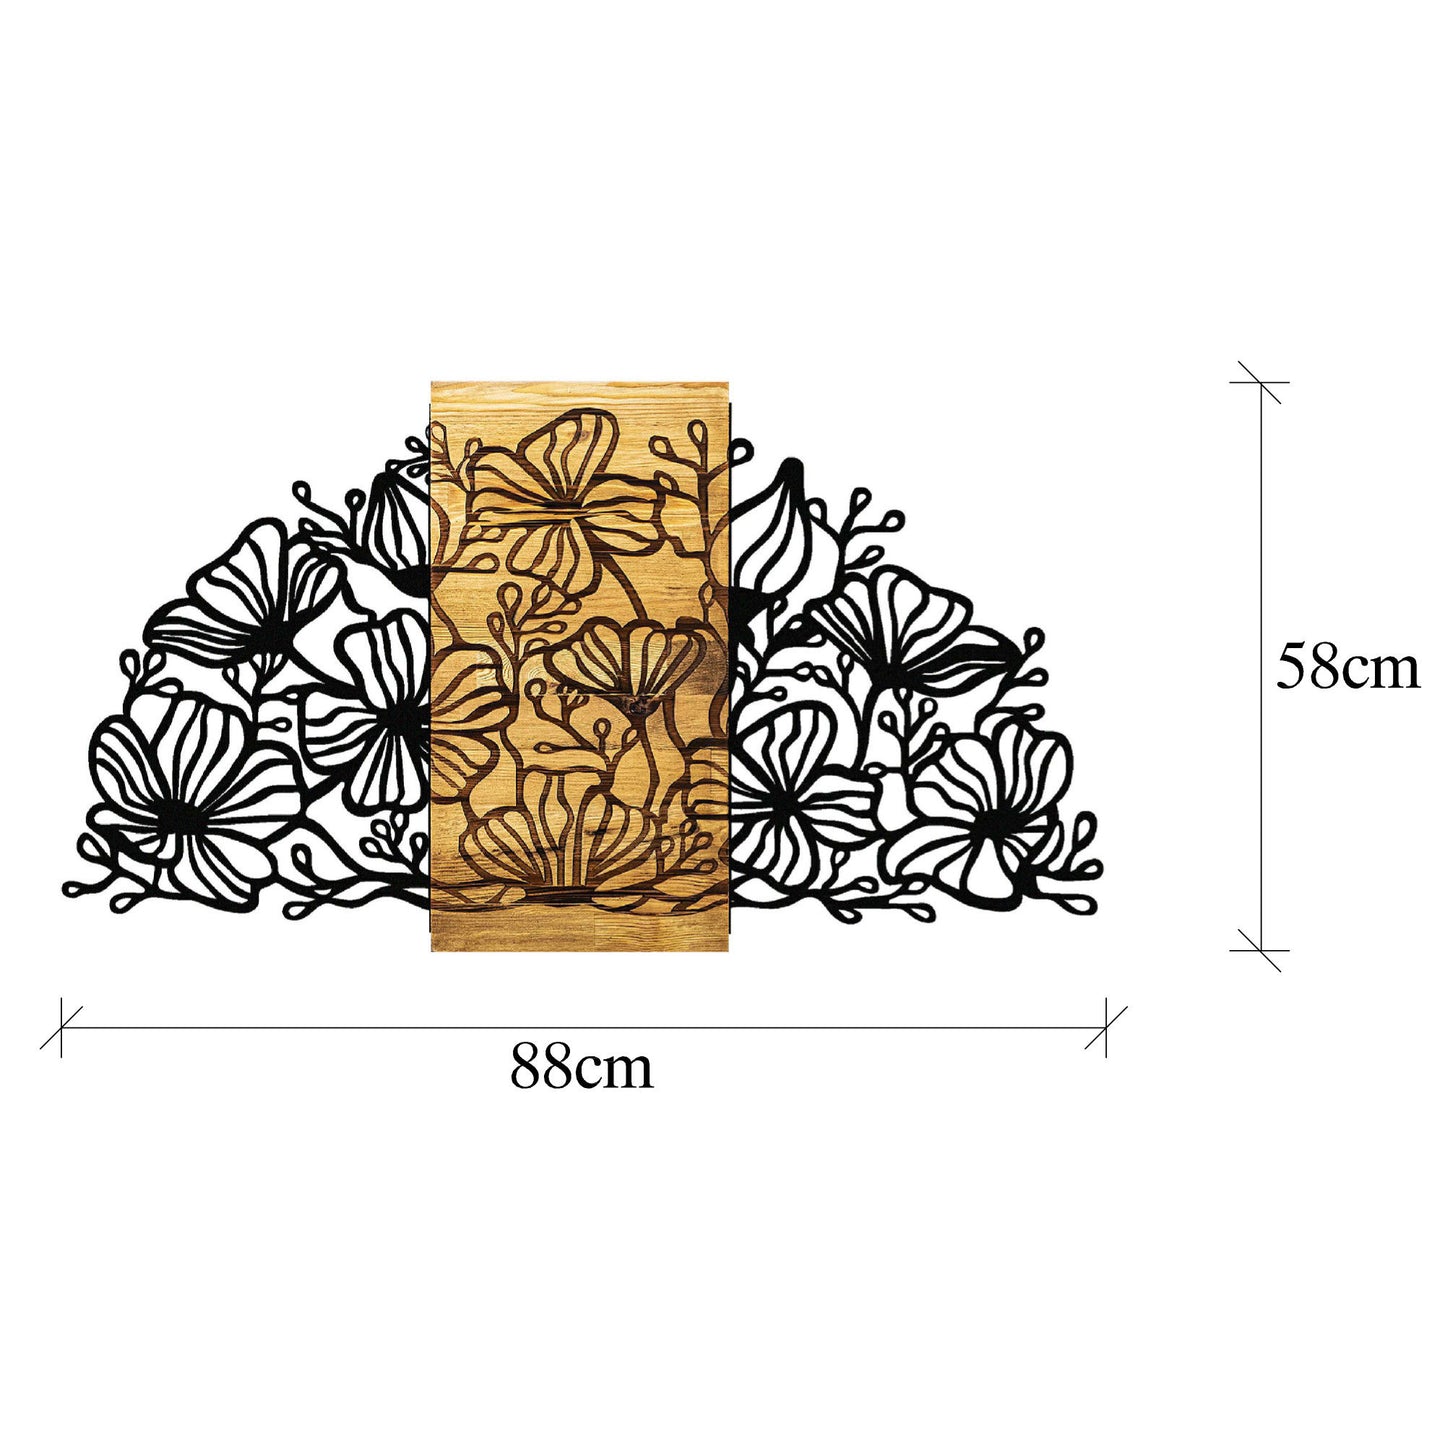 Flower 4 - Decorative Wooden Wall Accessory